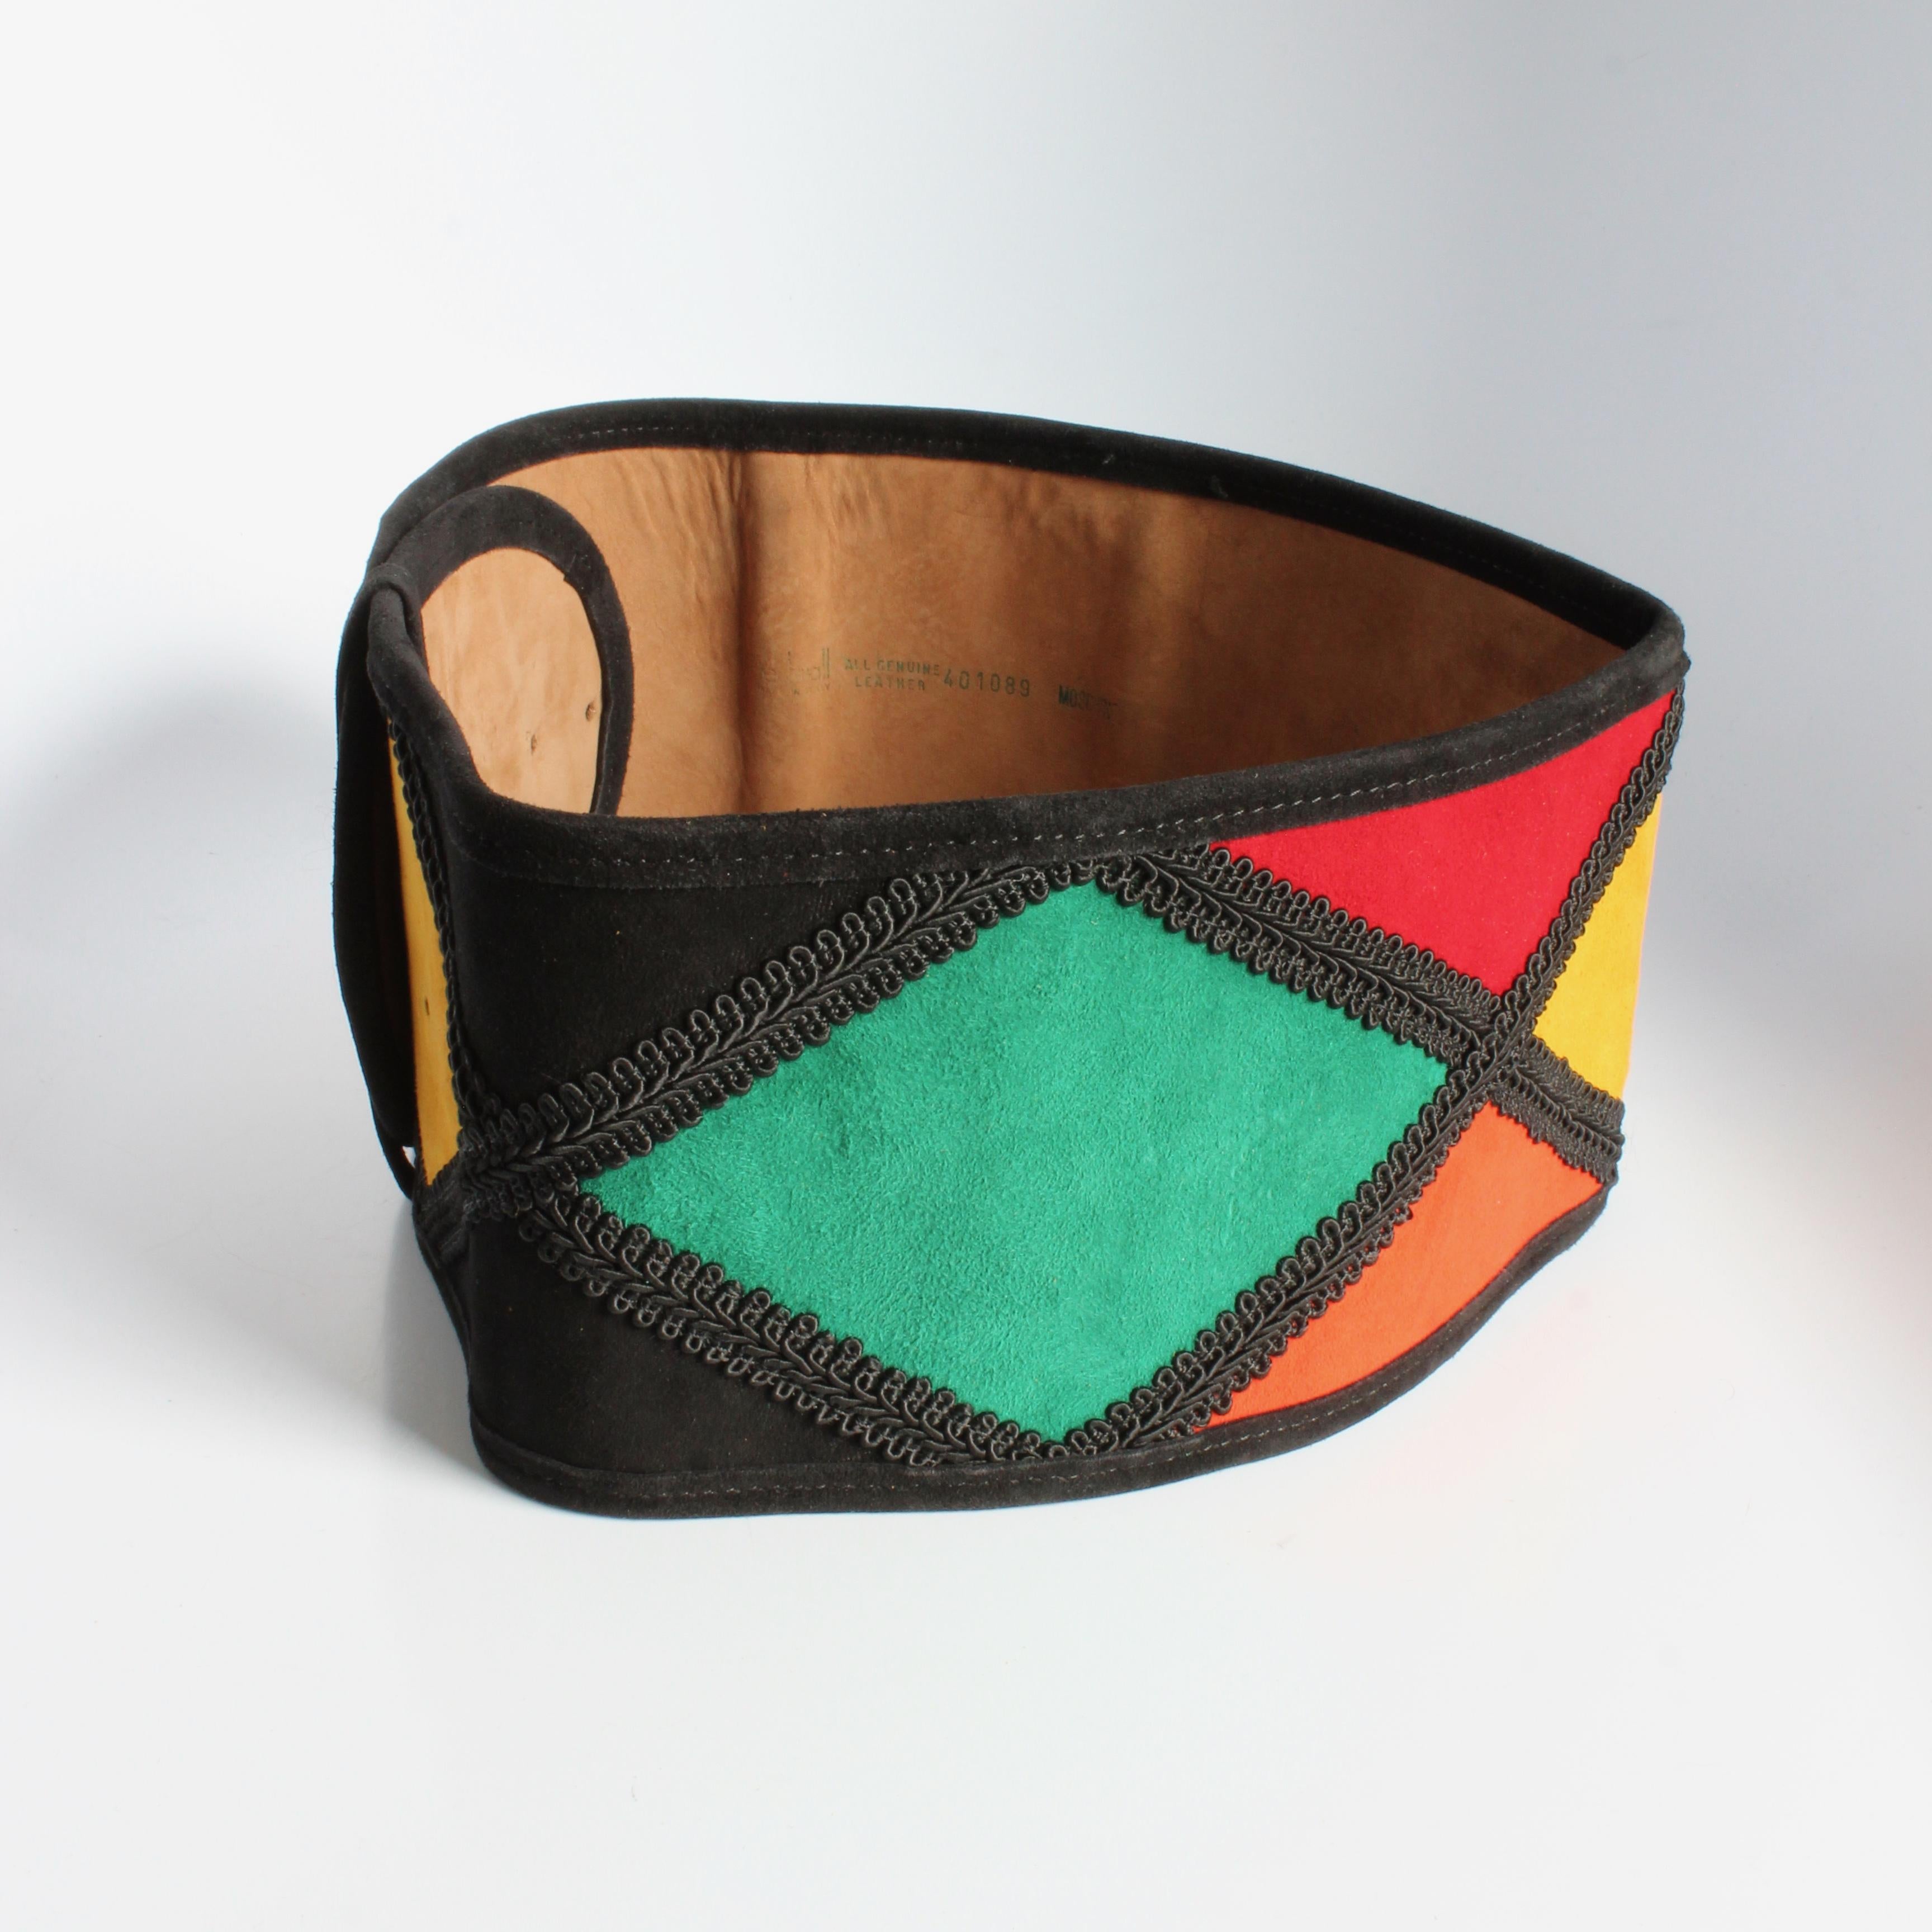 Moschino Belt Wide Harlequin Patch Multicolor Suede Leather Redwall Italy Rare For Sale 1